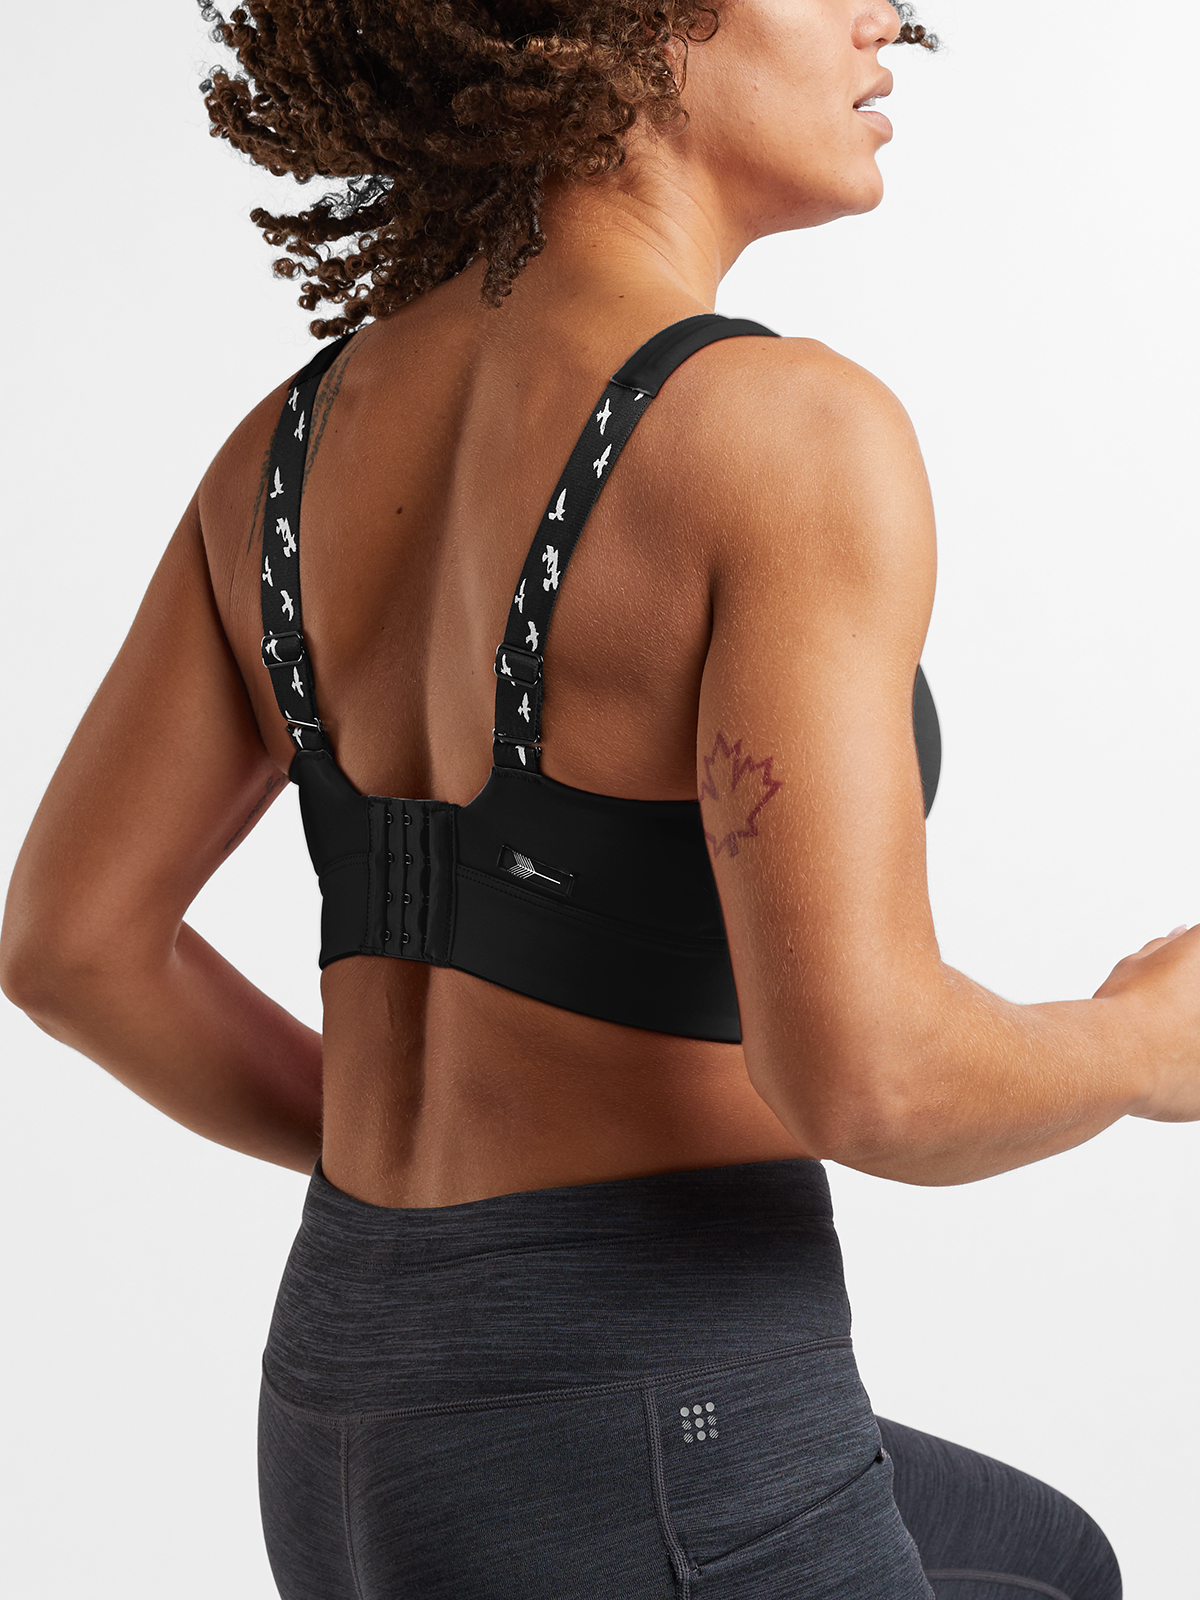 oiselle on X: We came to play. Meet the new sports bra collection - with  all the options out front.  #flystyle   / X